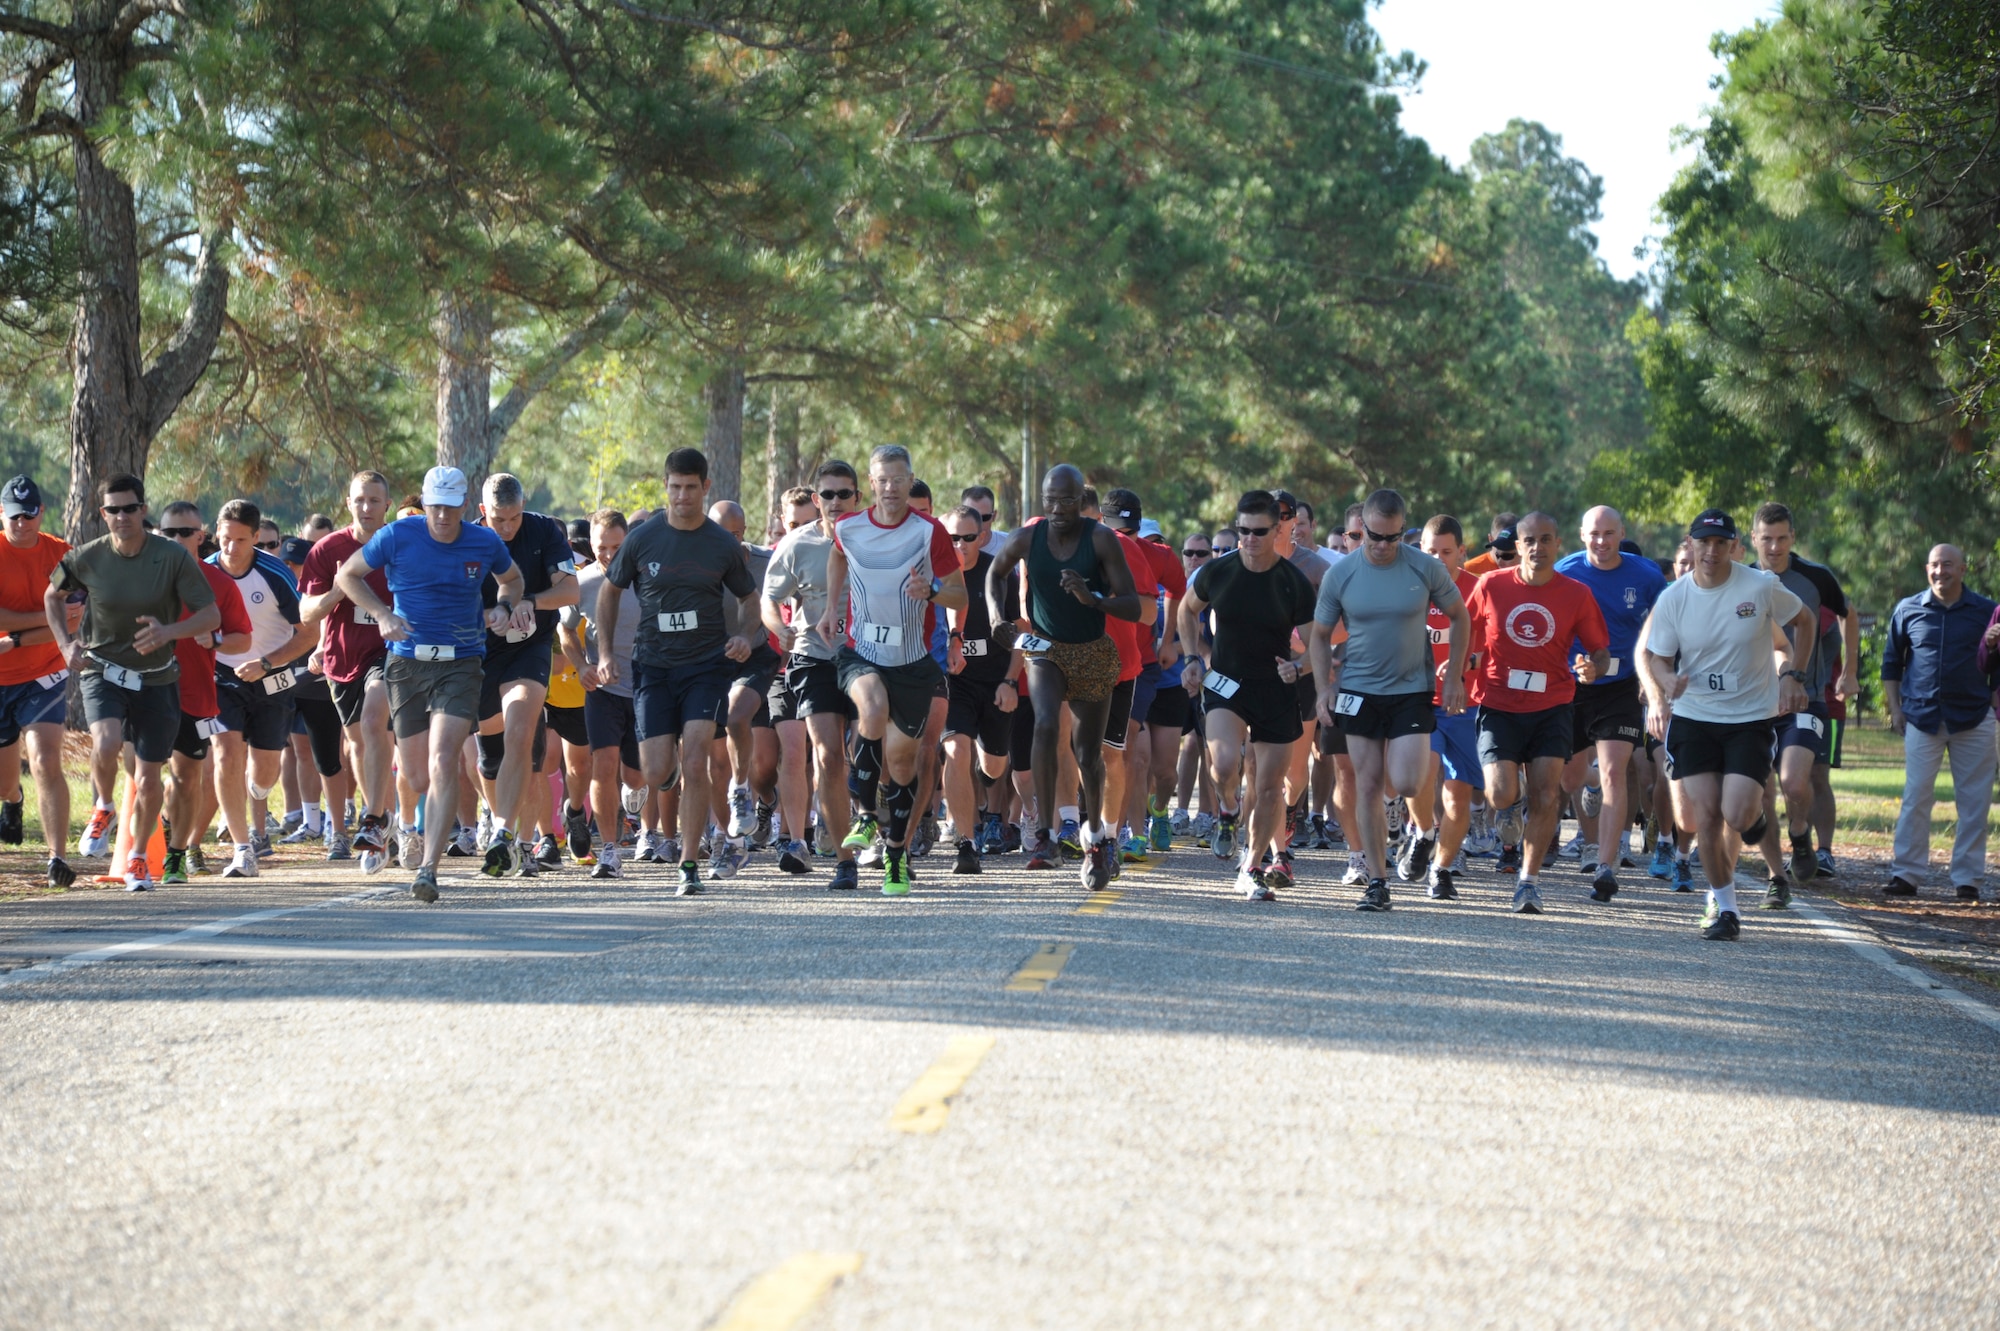 Students from Air War College and Air Command Staff College compete in a 5K race on Maxwell Air Force Base, Oct. 8. The race was part of a 2-day competition between the academic powerhouses compiling of approximately 20 events, both scholastic and athletic. (U.S. Air Force photo by Airman 1st Class William Blankenship)